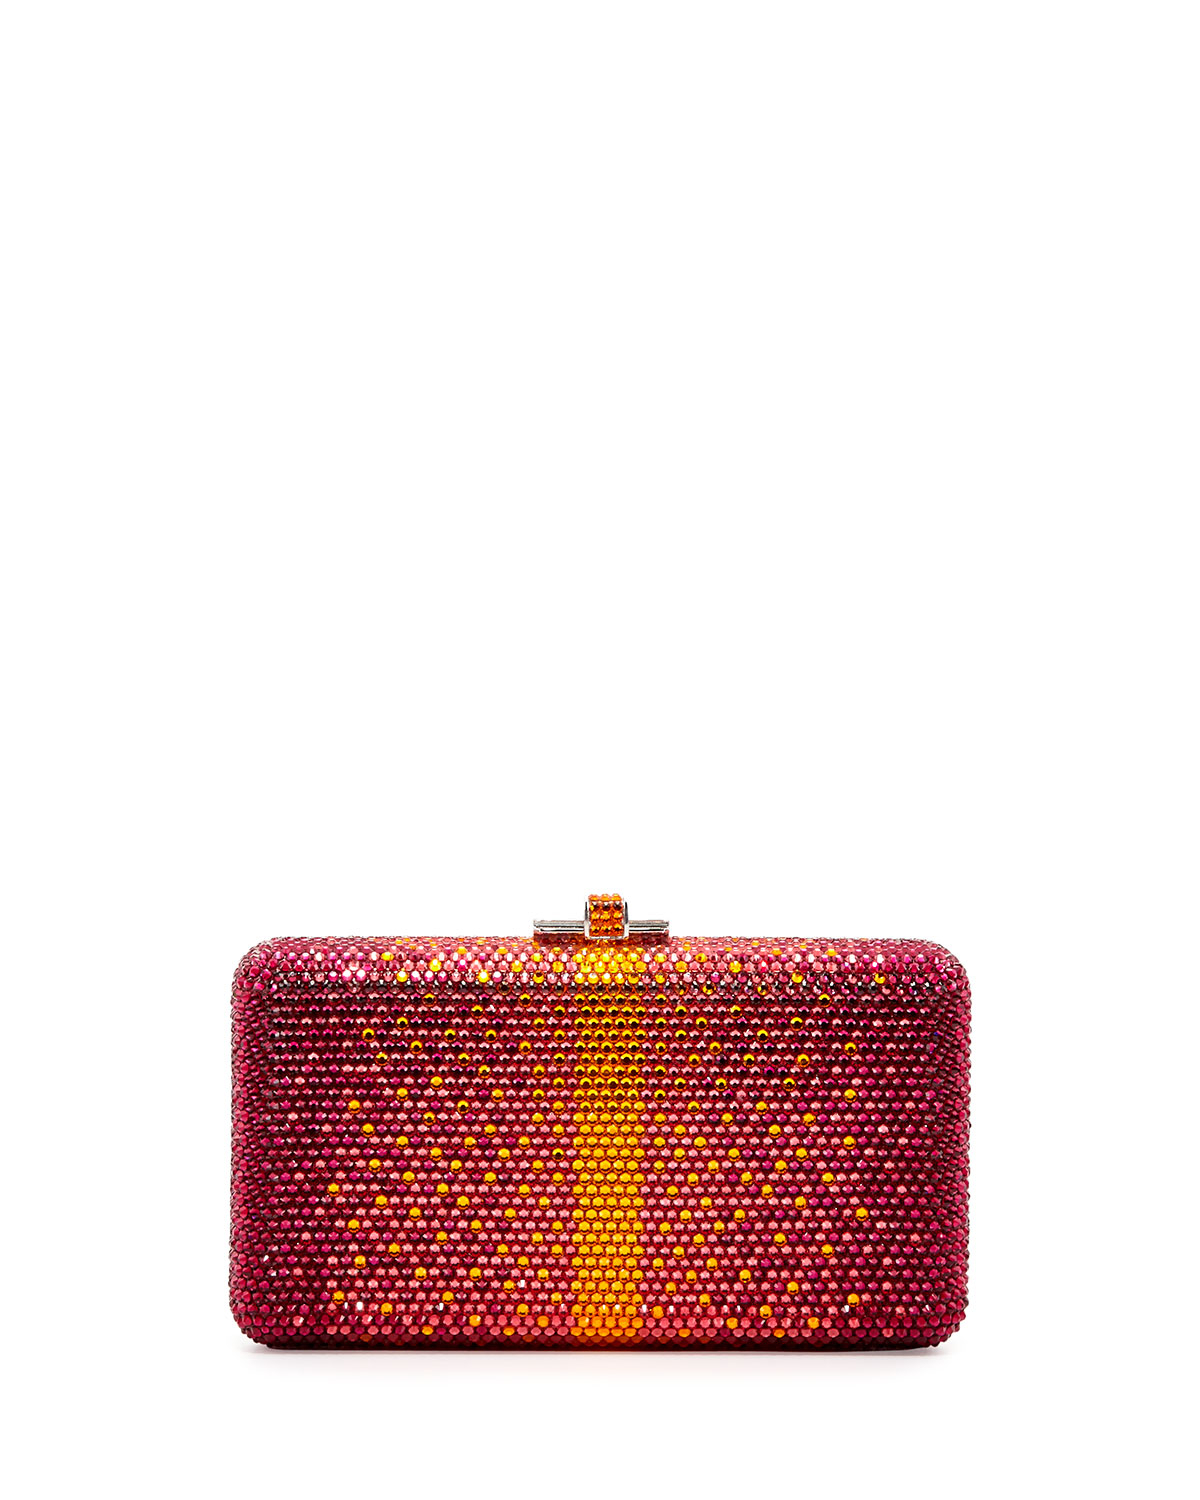 Lyst - Judith Leiber Couture Airstream Large Ombre Clutch Bag in Red